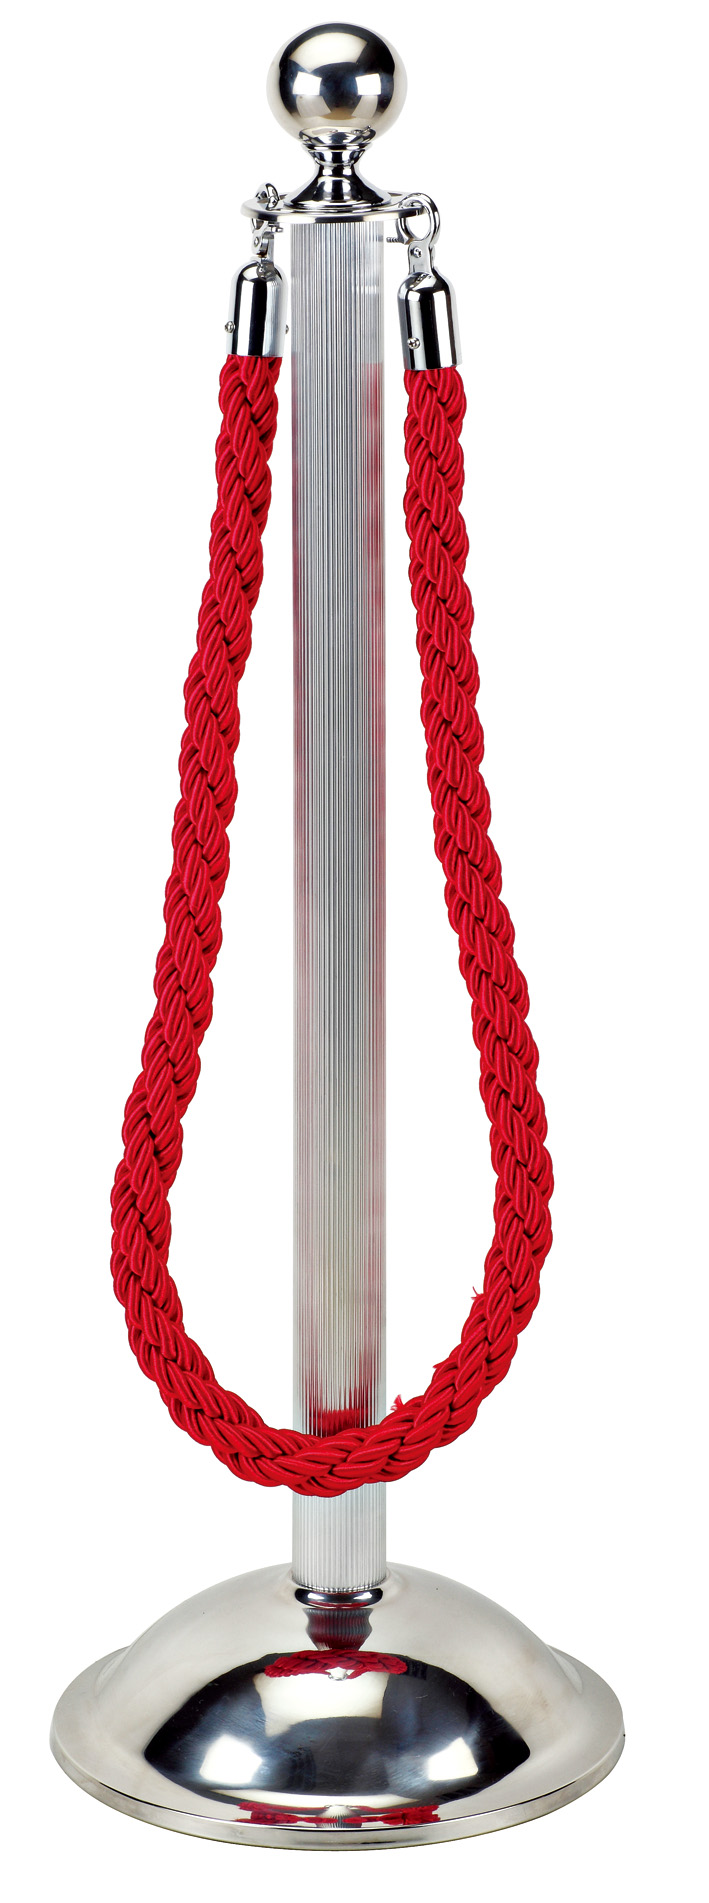 Rope Stanchion.jpg